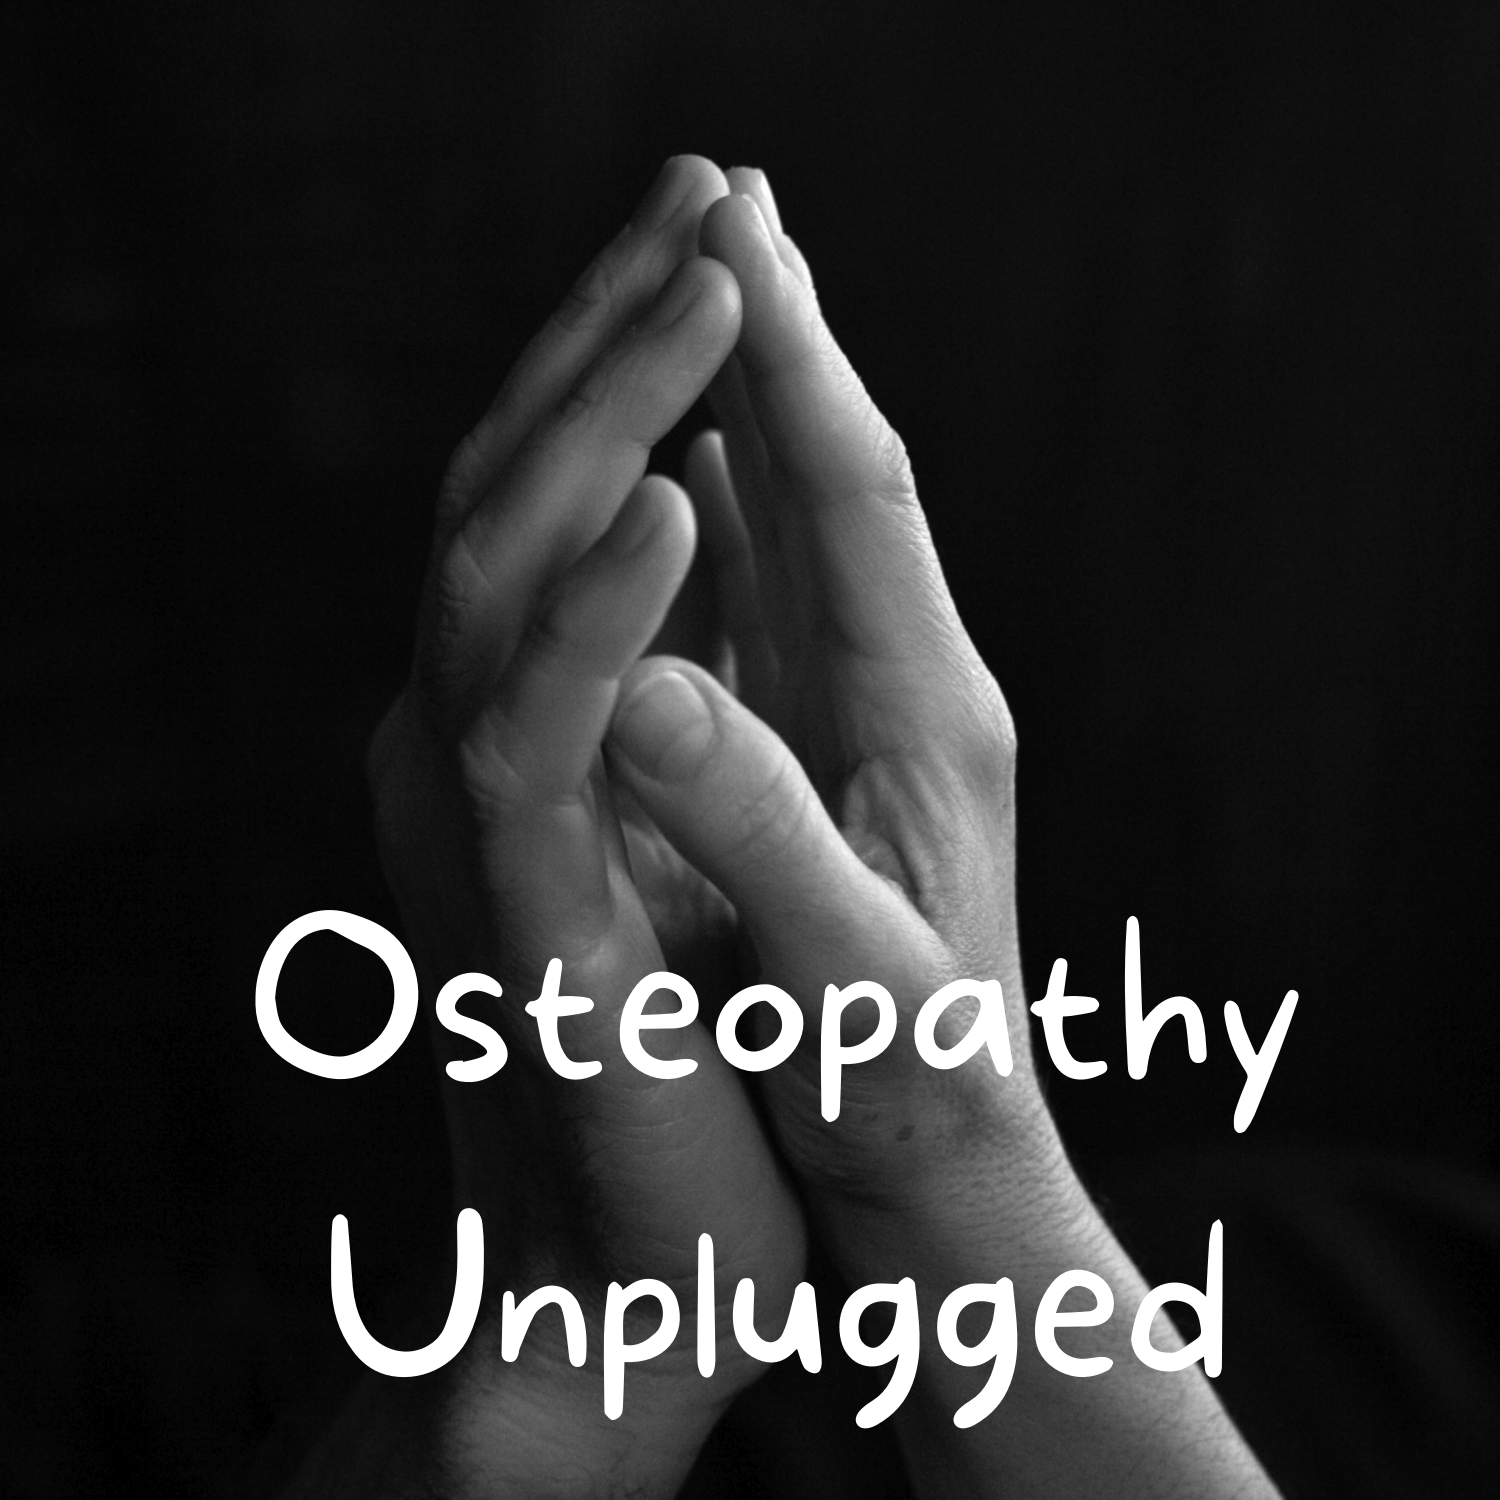 Episode 20 - How To End Or Not End An Osteopathic Treatment